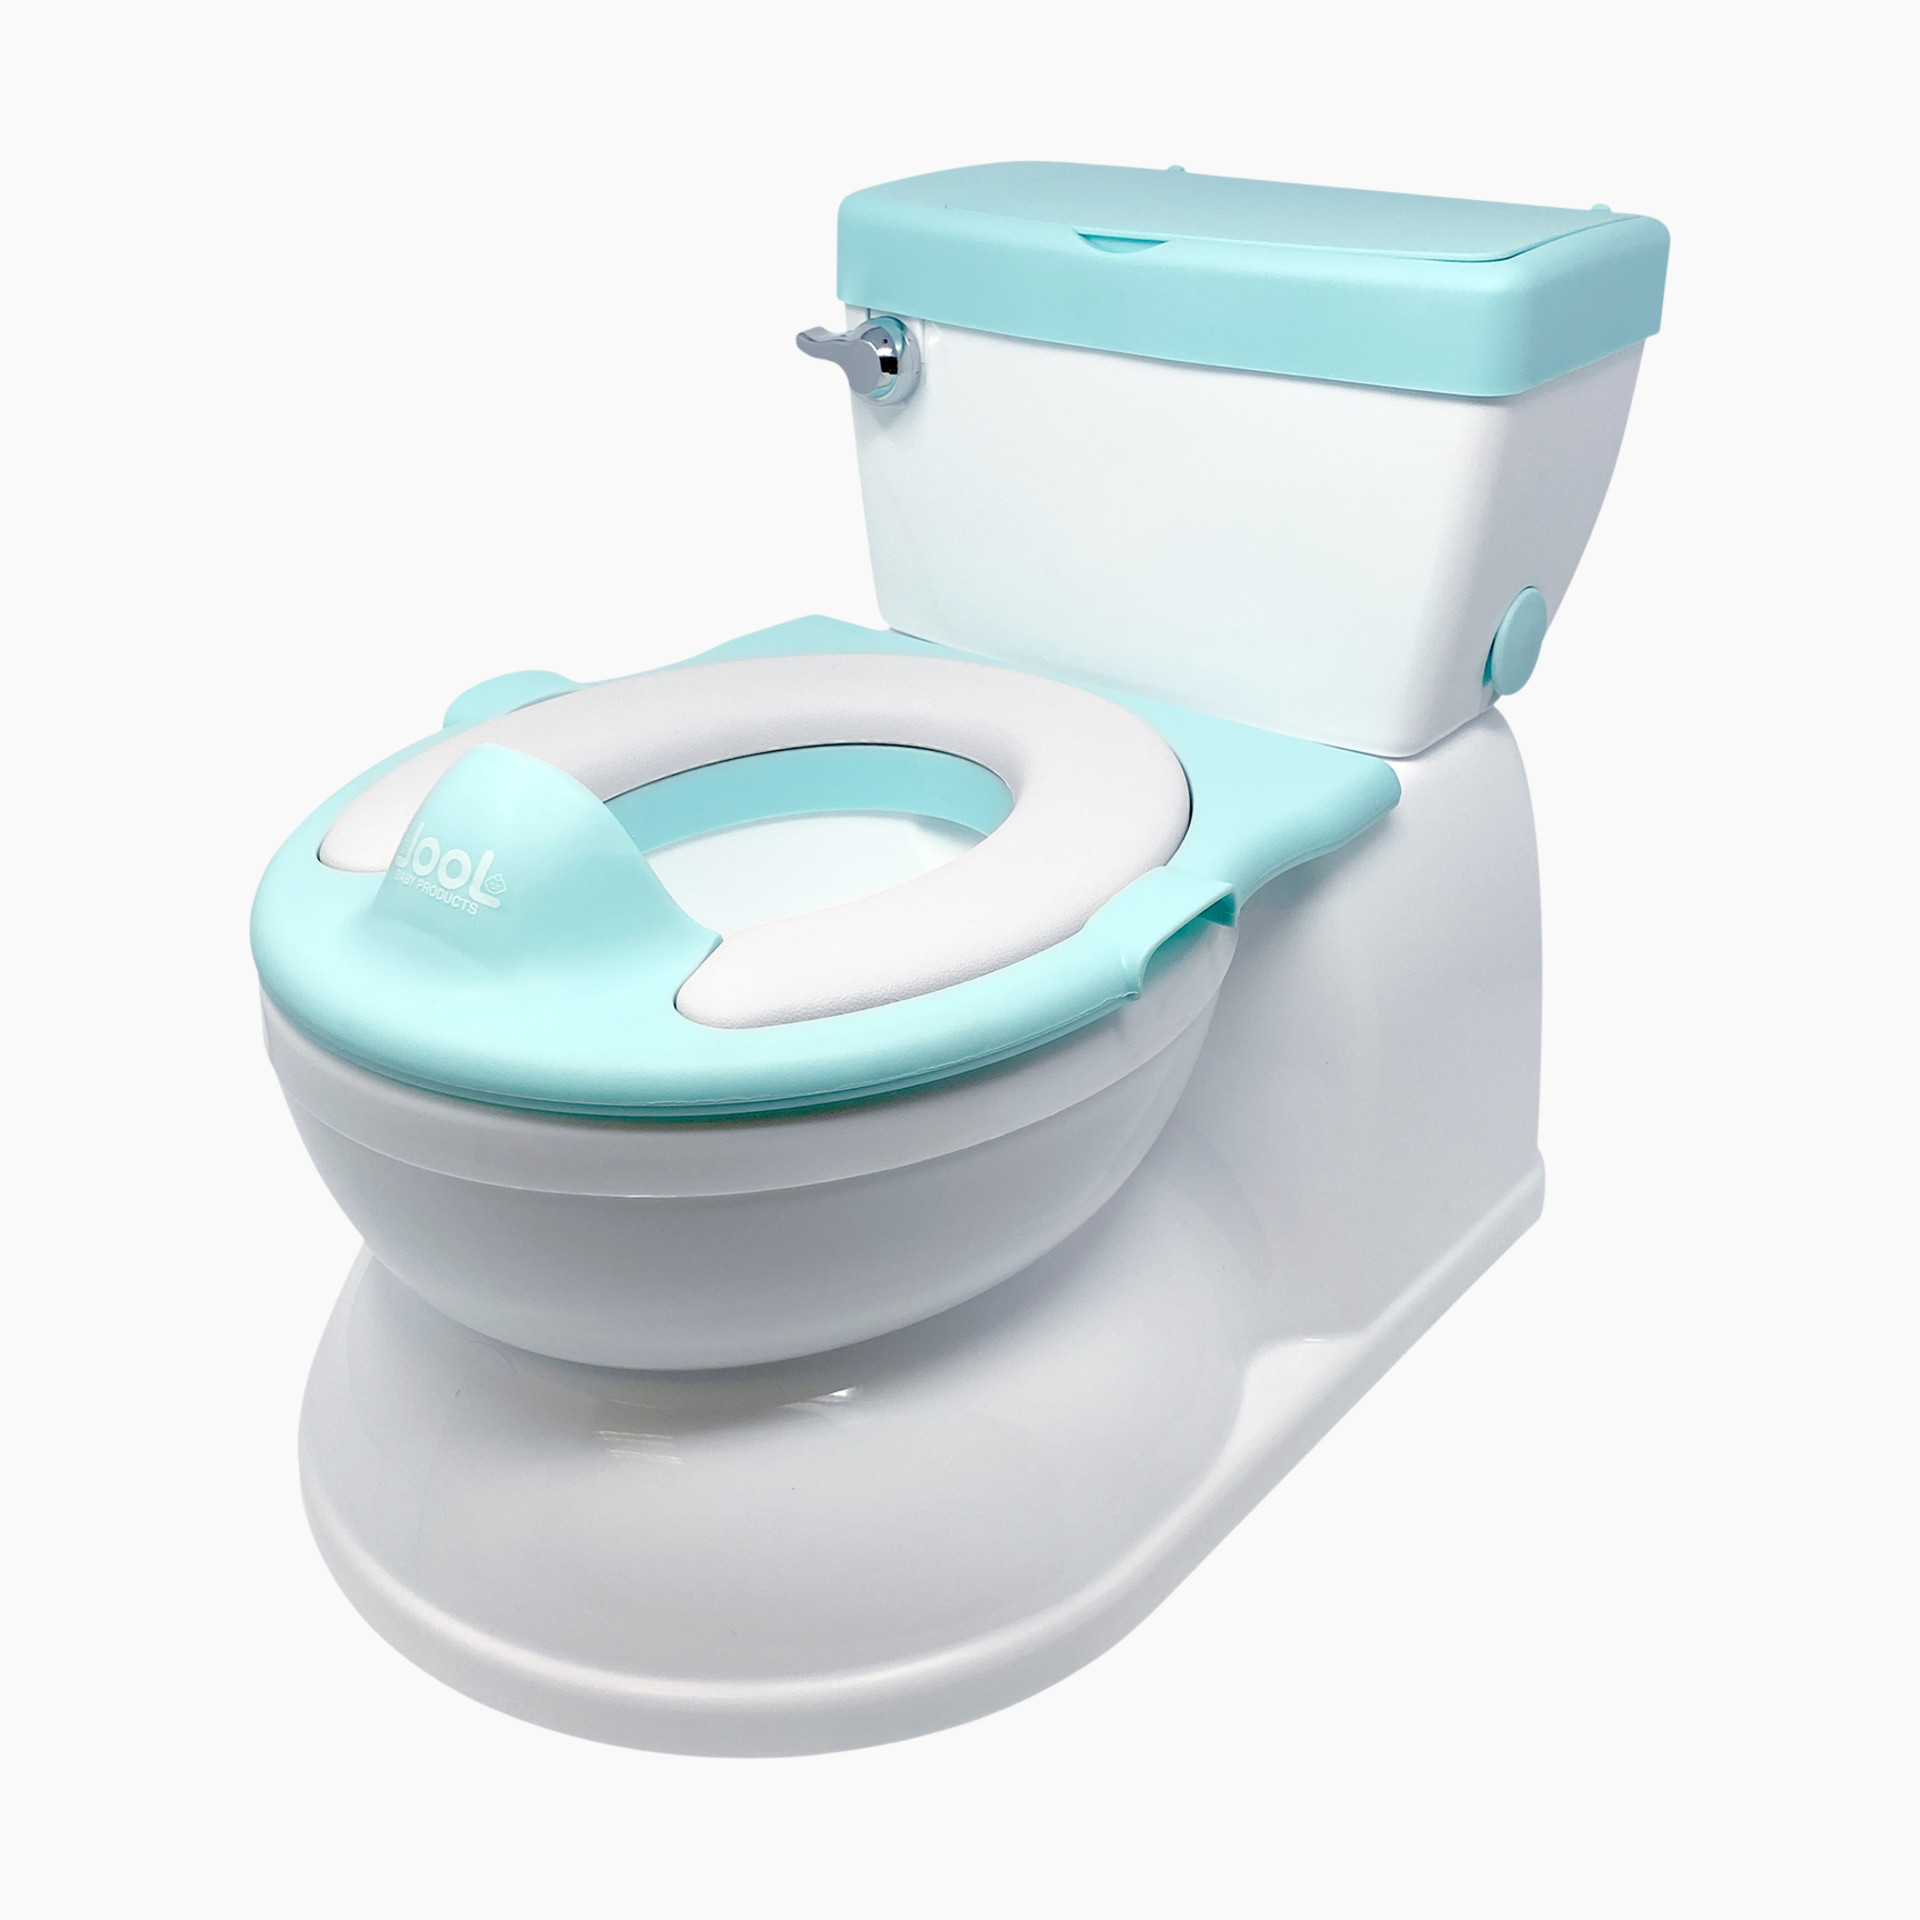 Potty Train Toilet Comfortable Real Feel Potty for Baby Children Toddlers